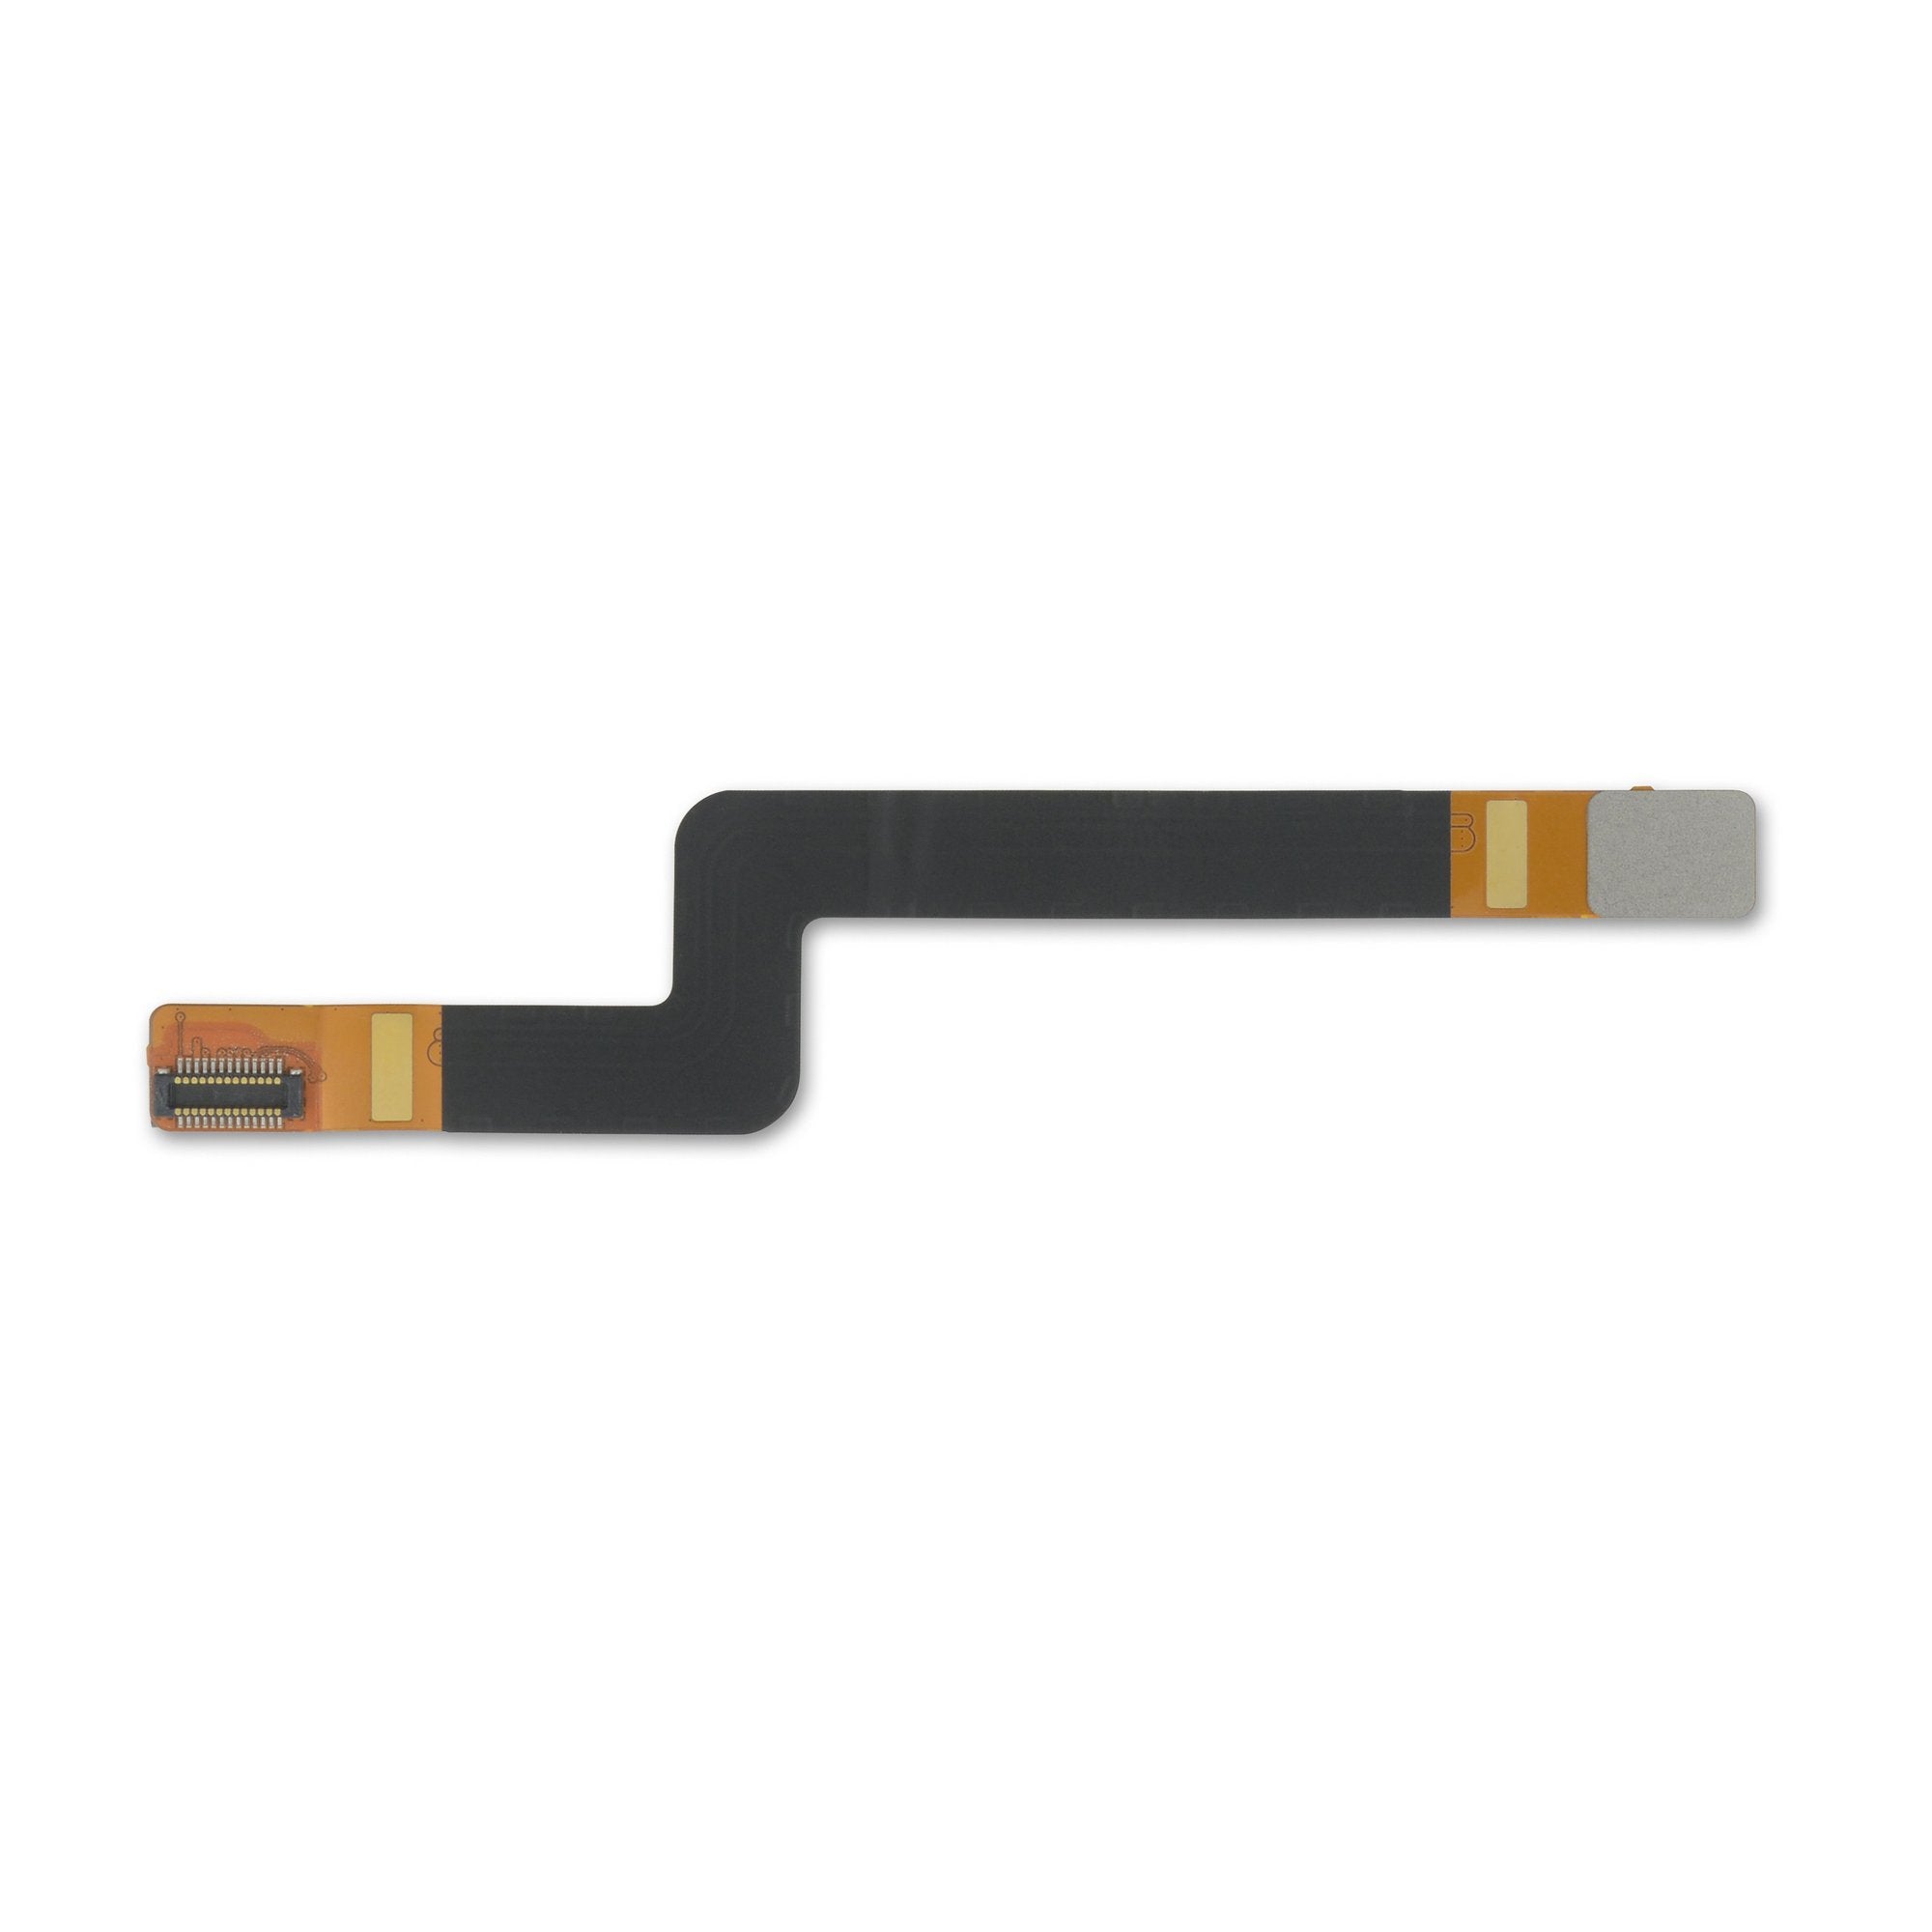 Surface Book (1st Gen) Digitizer Flex Cable Used